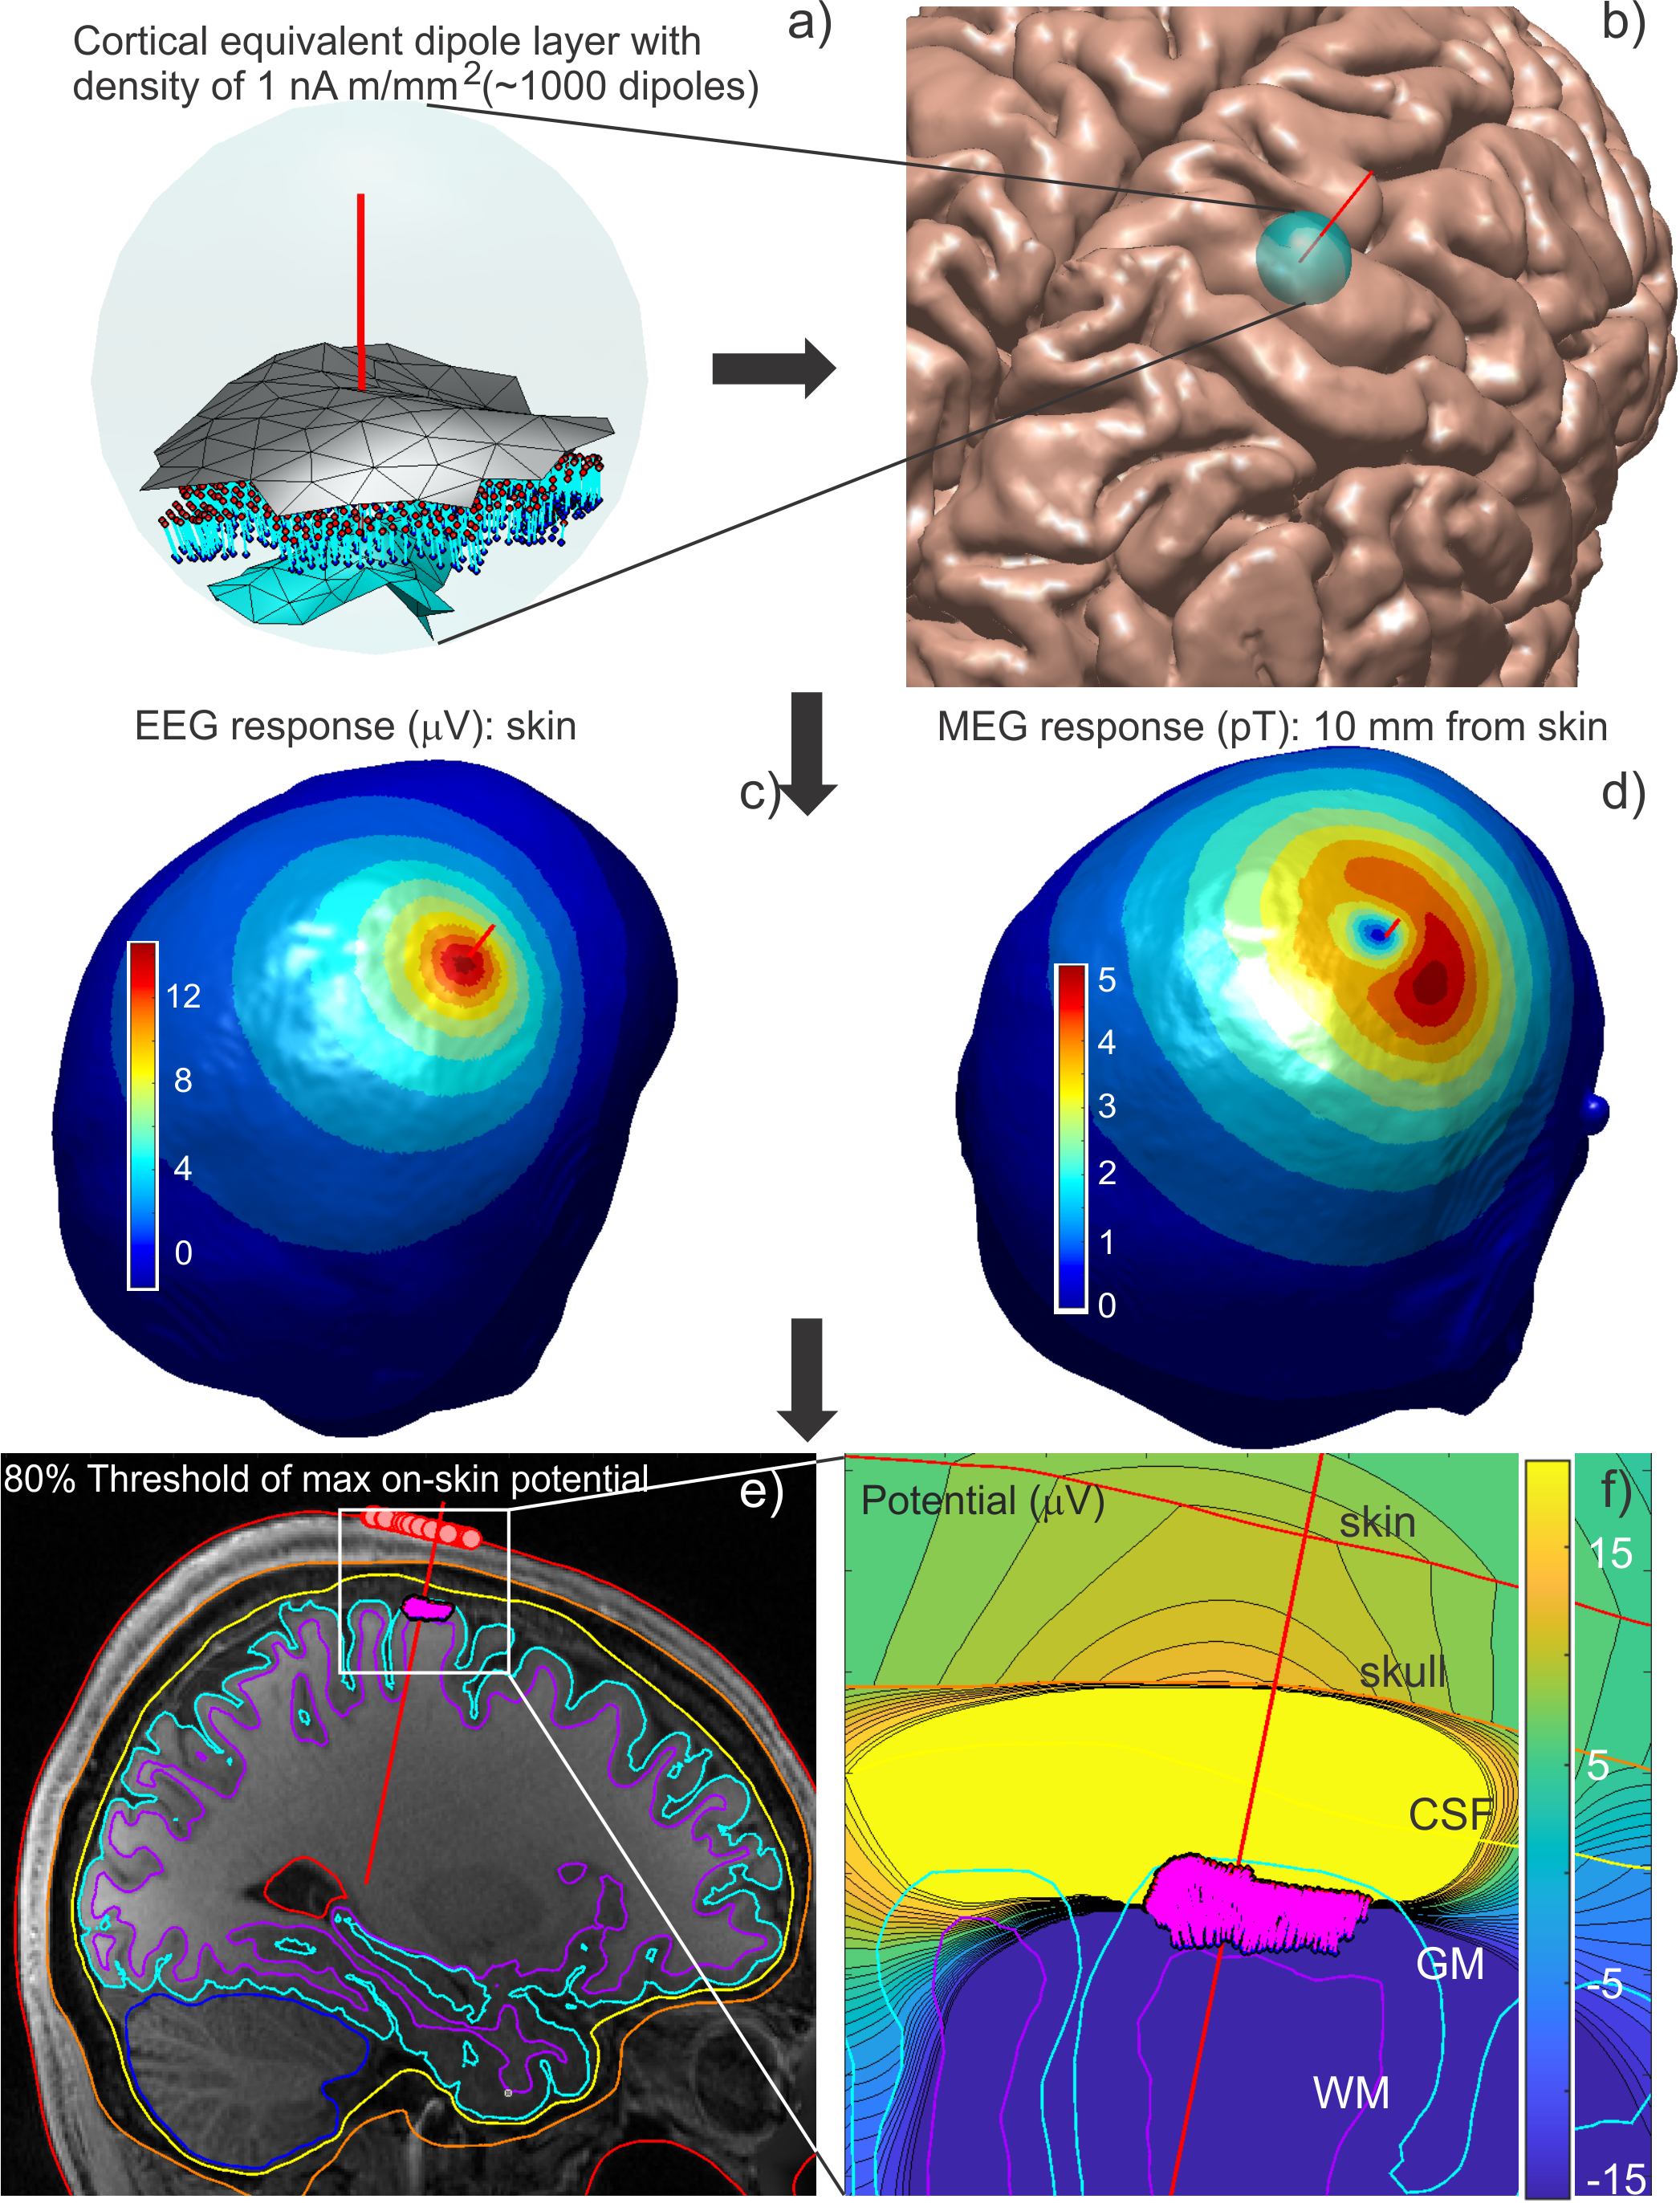 a) Elementary cortical dipoles placed between the gray matter surface and white matter surface within the region indicated in (b). b) Blue sphere on the gray matter surface indicates the position of the cluster of dipoles in (a). c) EEG response (Volts) arising from the dipole configuration in (a) viewed on the skin surface. d) MEG response (pico-teslas) arising from the dipole configuration in (a) viewed on the skin surface. e) Coregistration of head model against original MRI data in the sagittal plane.  Small pink circles are drawn at locations on the scalp that experience strong EEG/MEG fields. f) Contour plot of potential (micro-volts) in the region subtended by the white box in (e).